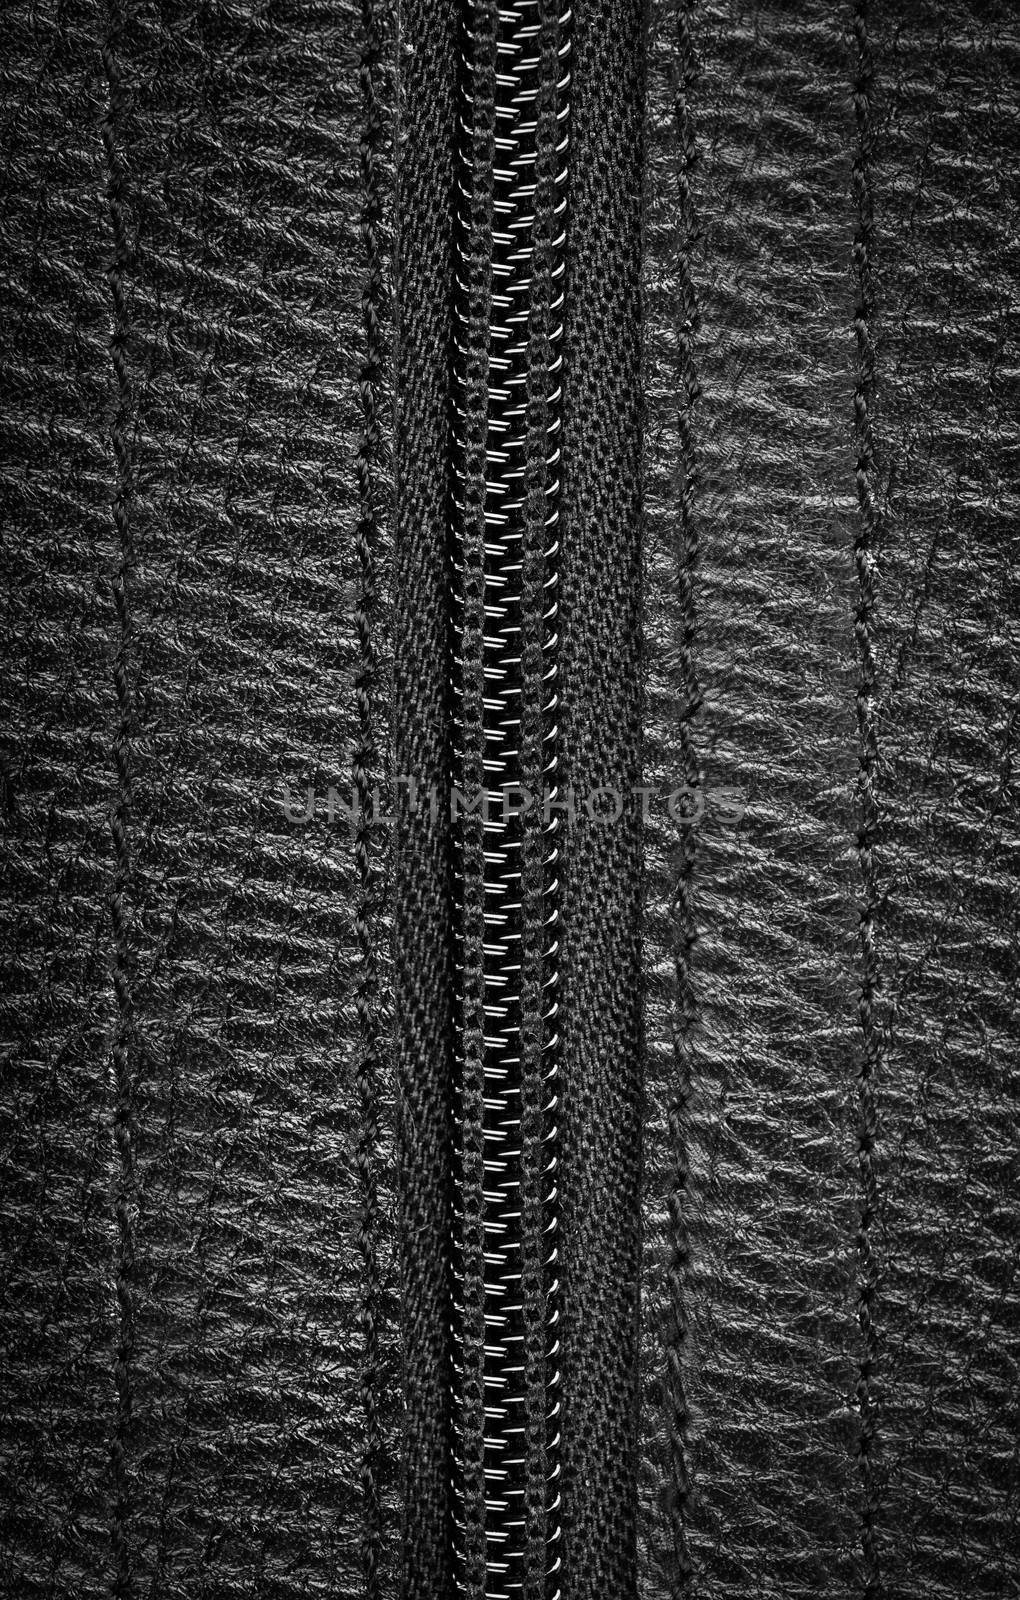 Close-up view of a closed zipper on a black leather bag